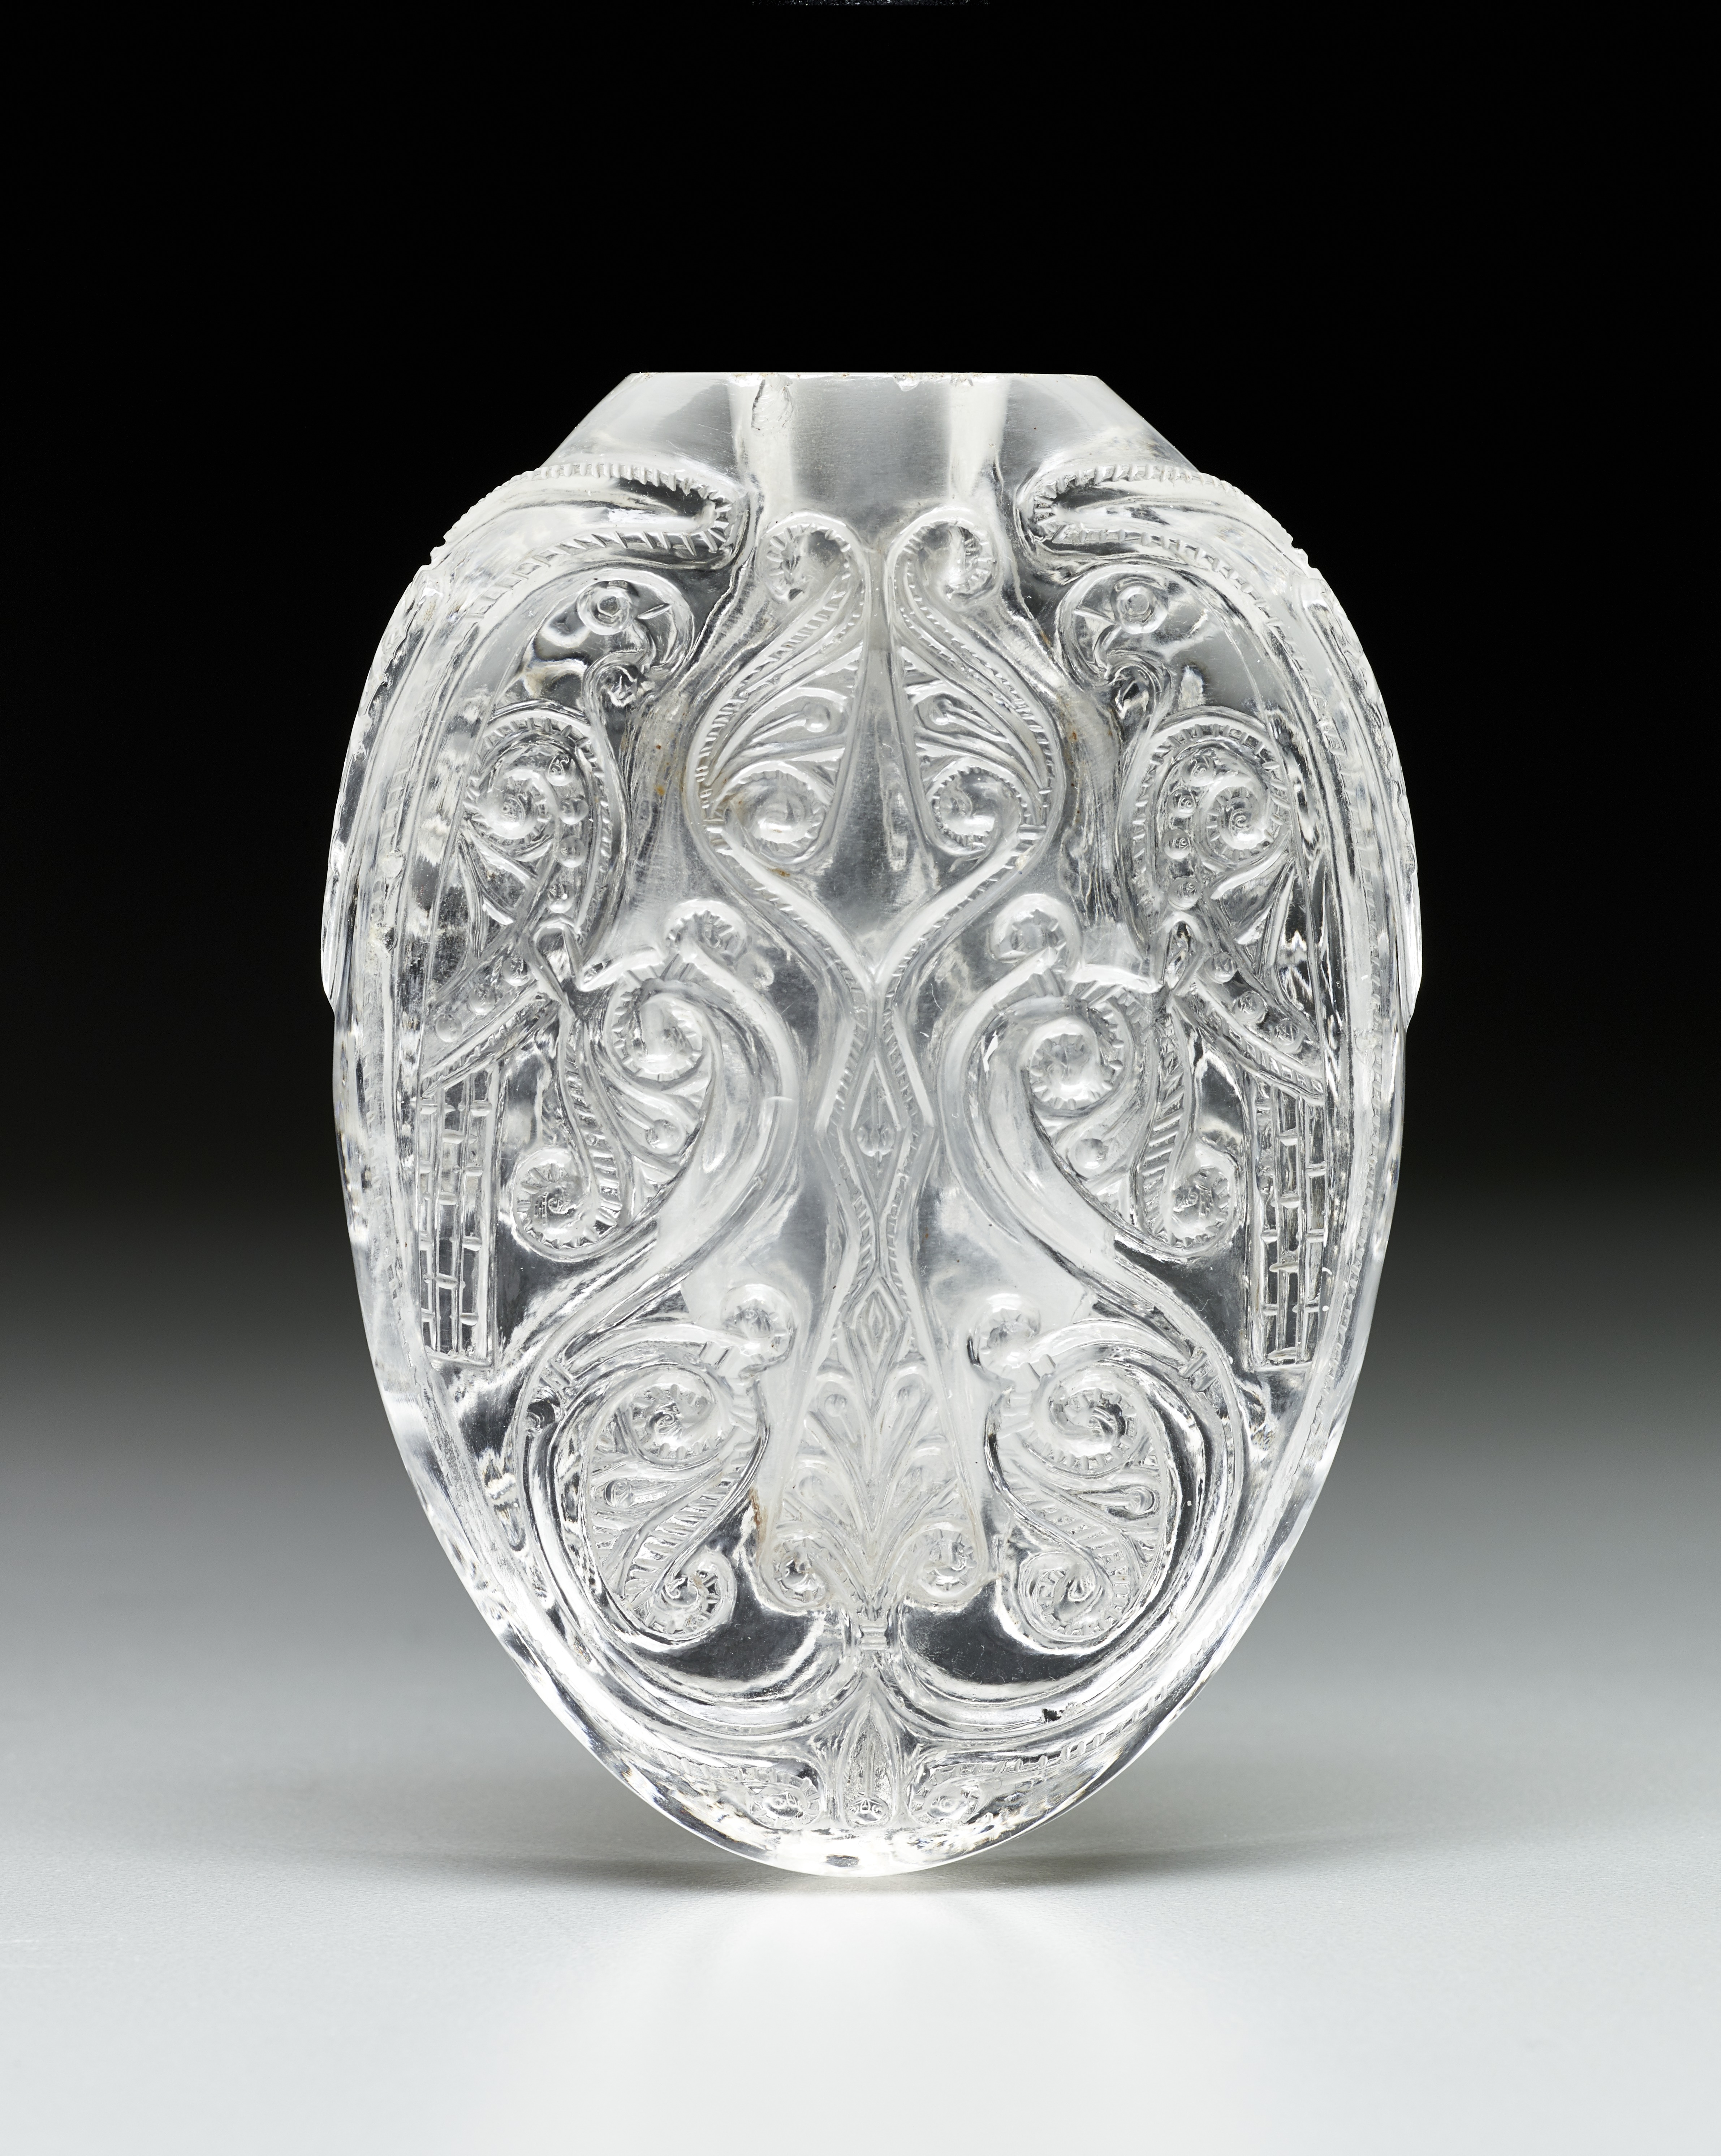 Flask, circa 1025, rock crystal. The Keir Collection of Islamic Art, on loan to the Dallas Museum of Art, K.1.2014.102 